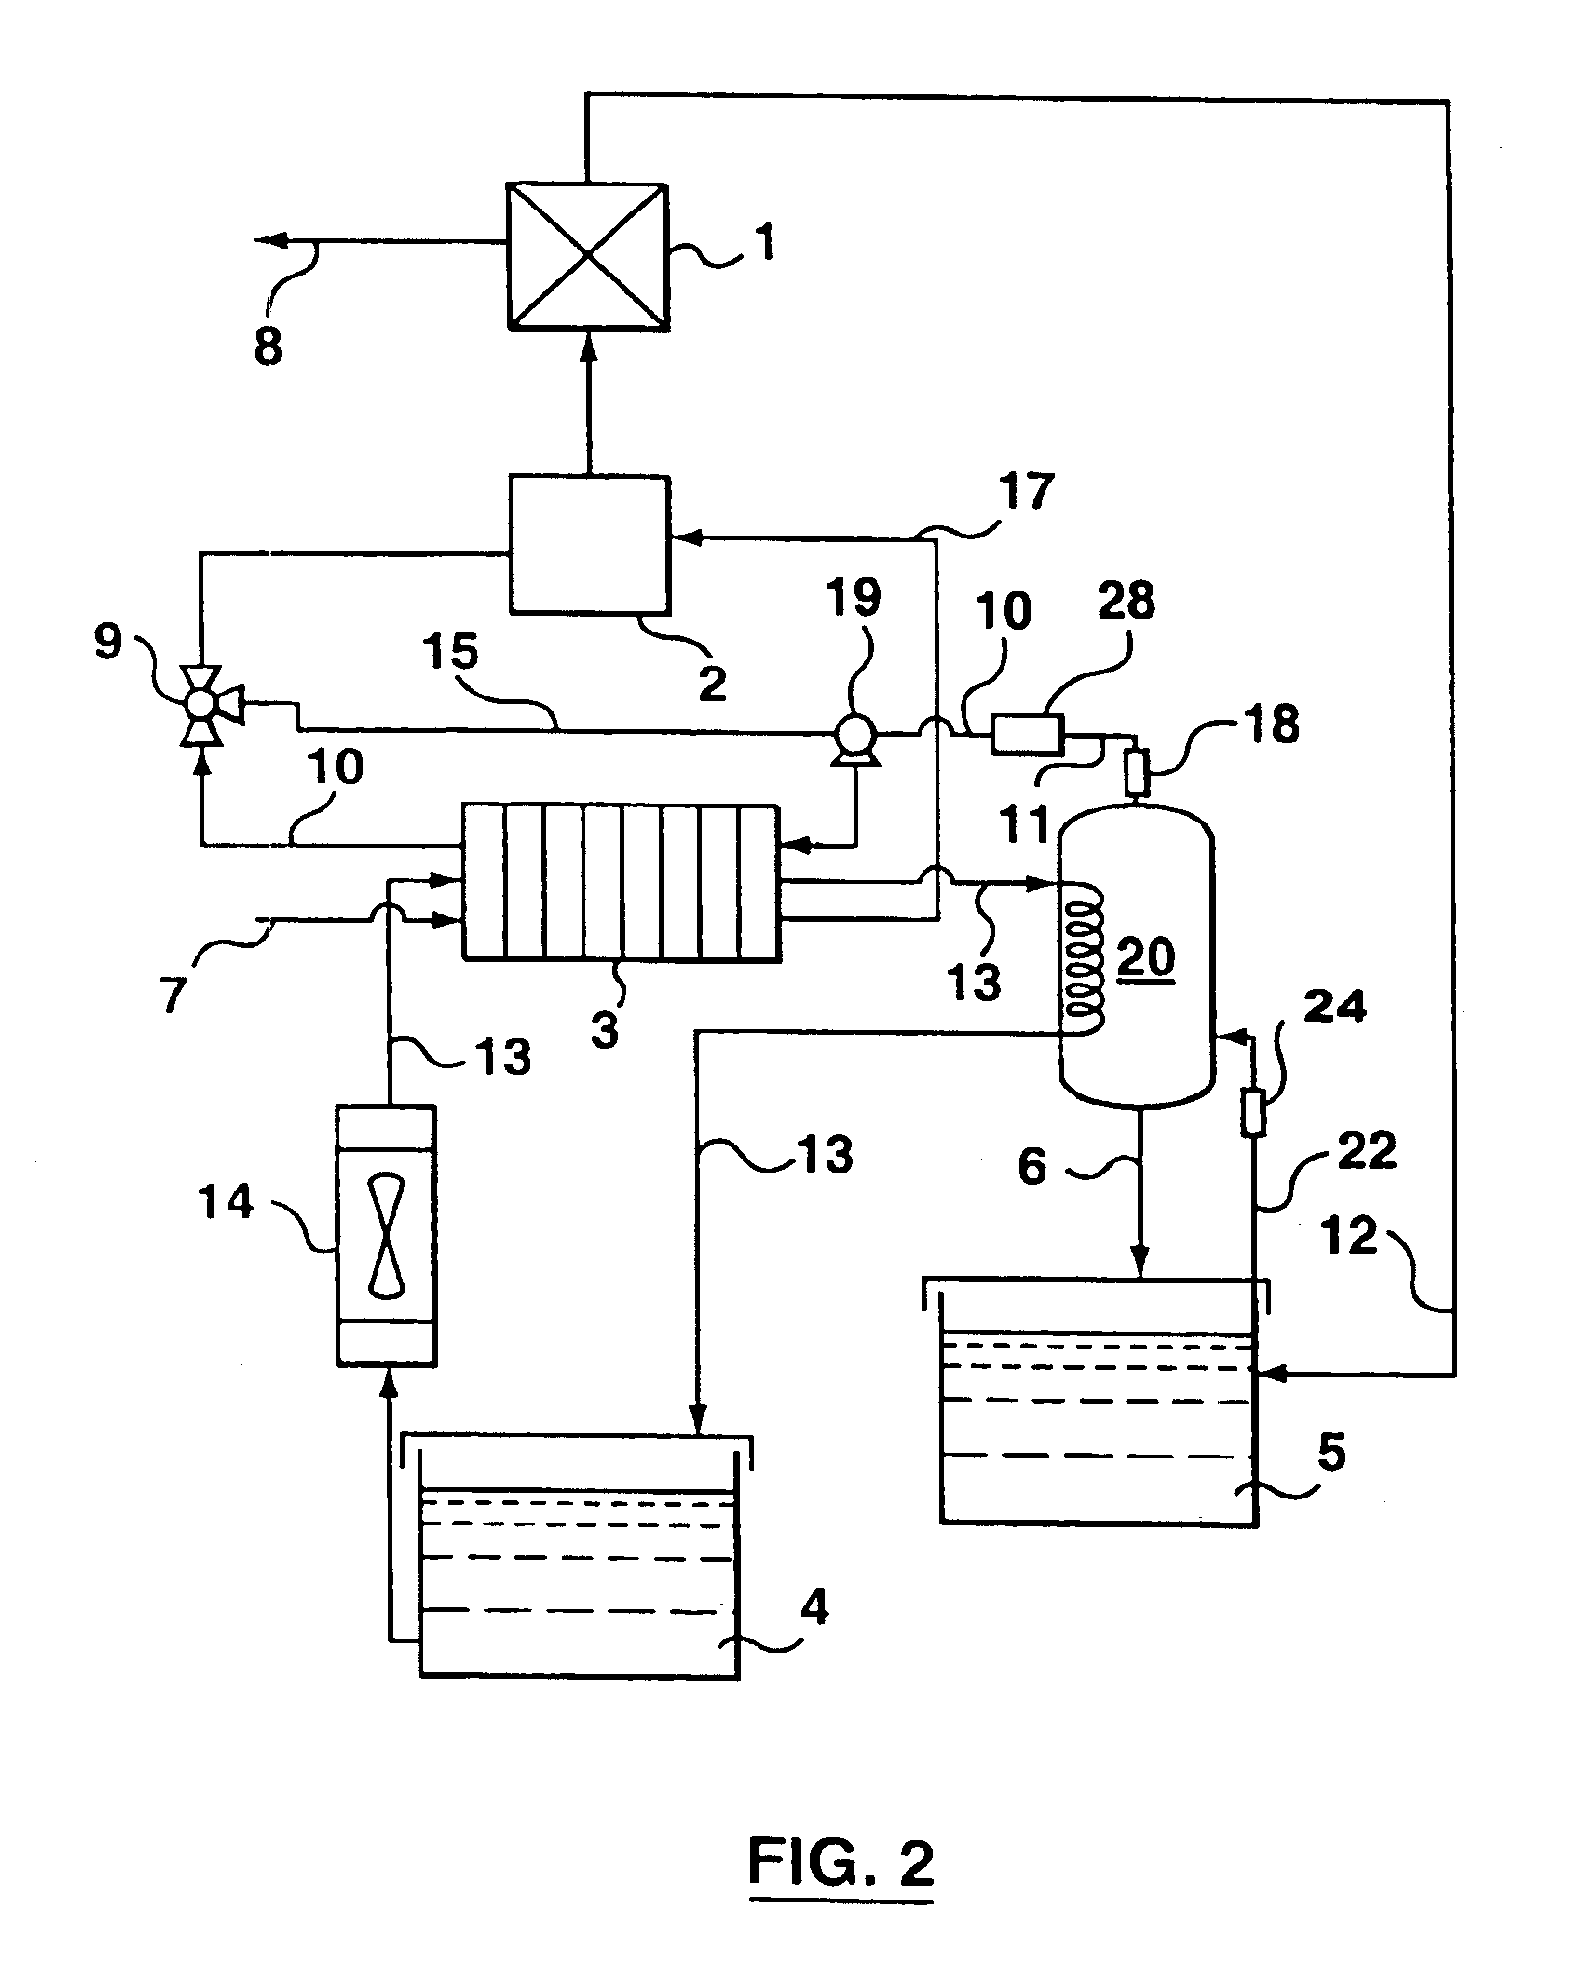 Chemical hydride hydrogen generation system and fuel cell stack incorporating a common heat transfer circuit